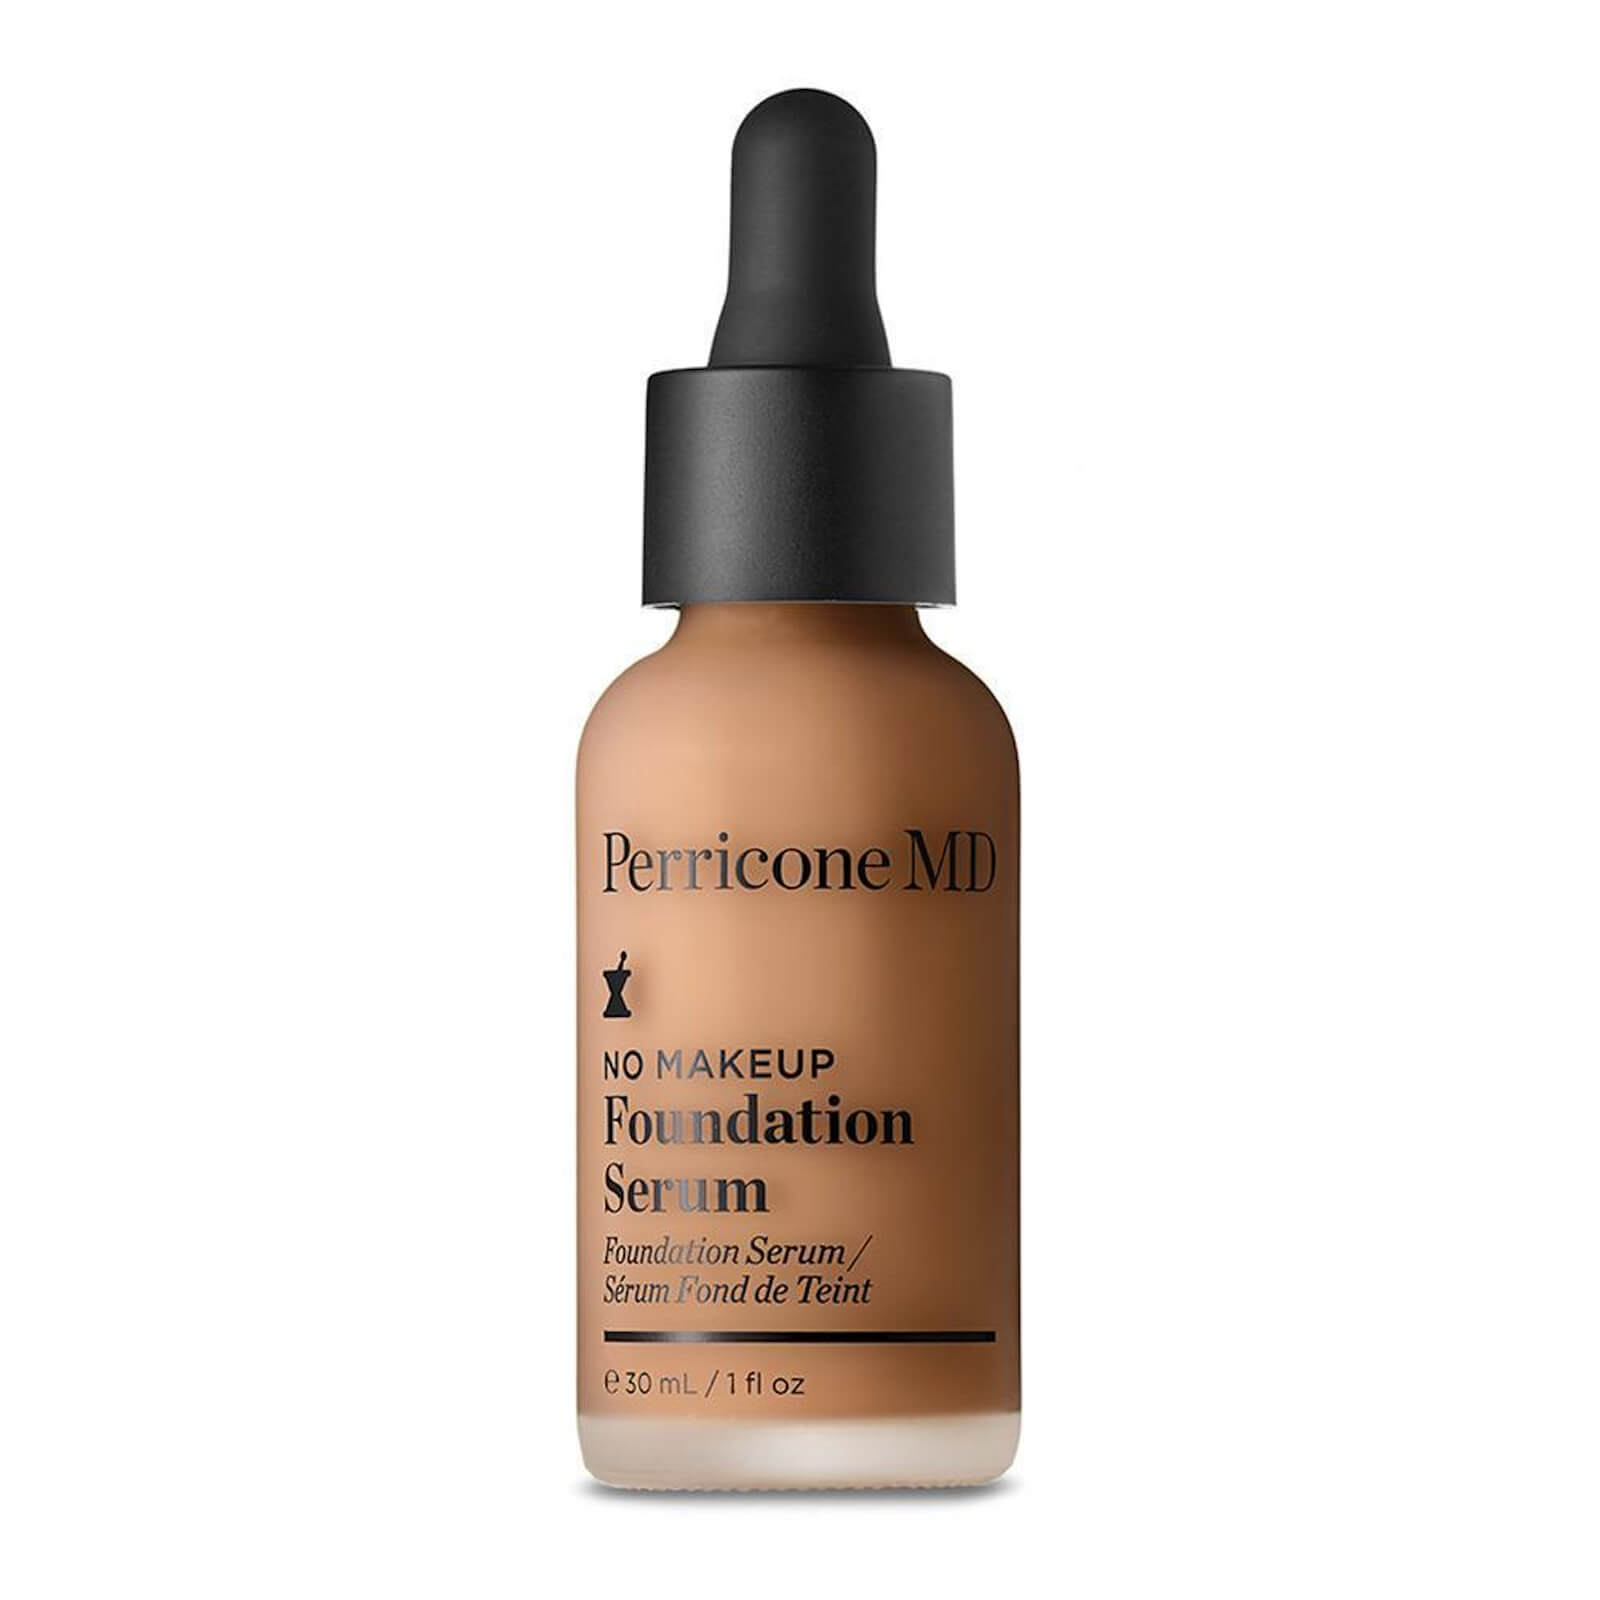 Perricone MD No Makeup Foundation Serum SPF 20 30ml (Various Shades) - 6 Golden